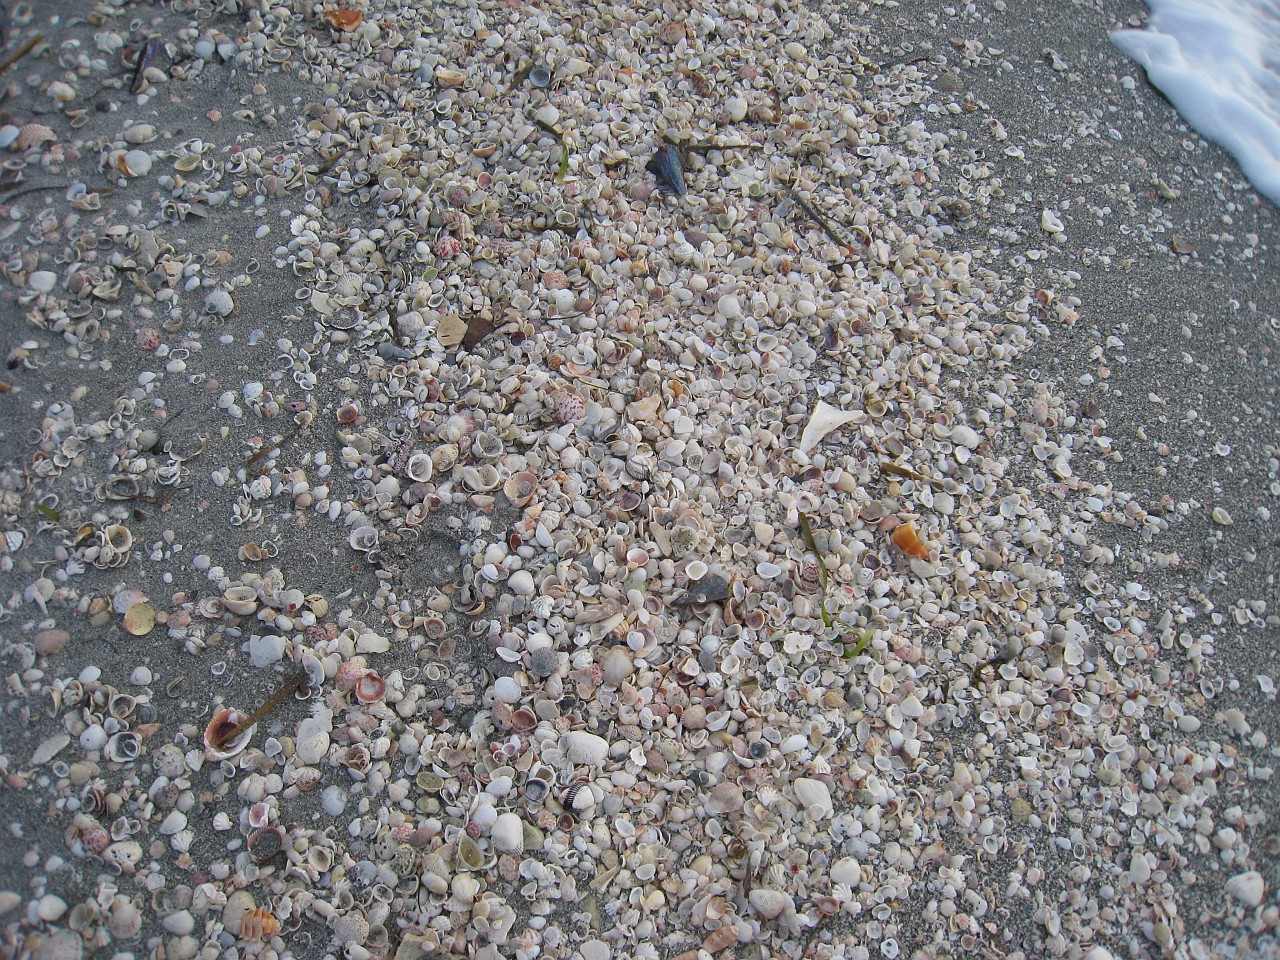 Vacation 2007-12 - Sanibel Island 0079.jpg - Our vacation for 2007-08 to Florida included a side trip to Sanibel Island. The main attraction here is "shelling", known as "The Sanibel Stoop" named for people bending over to pick up shells. It was a cold and blustery day at best!